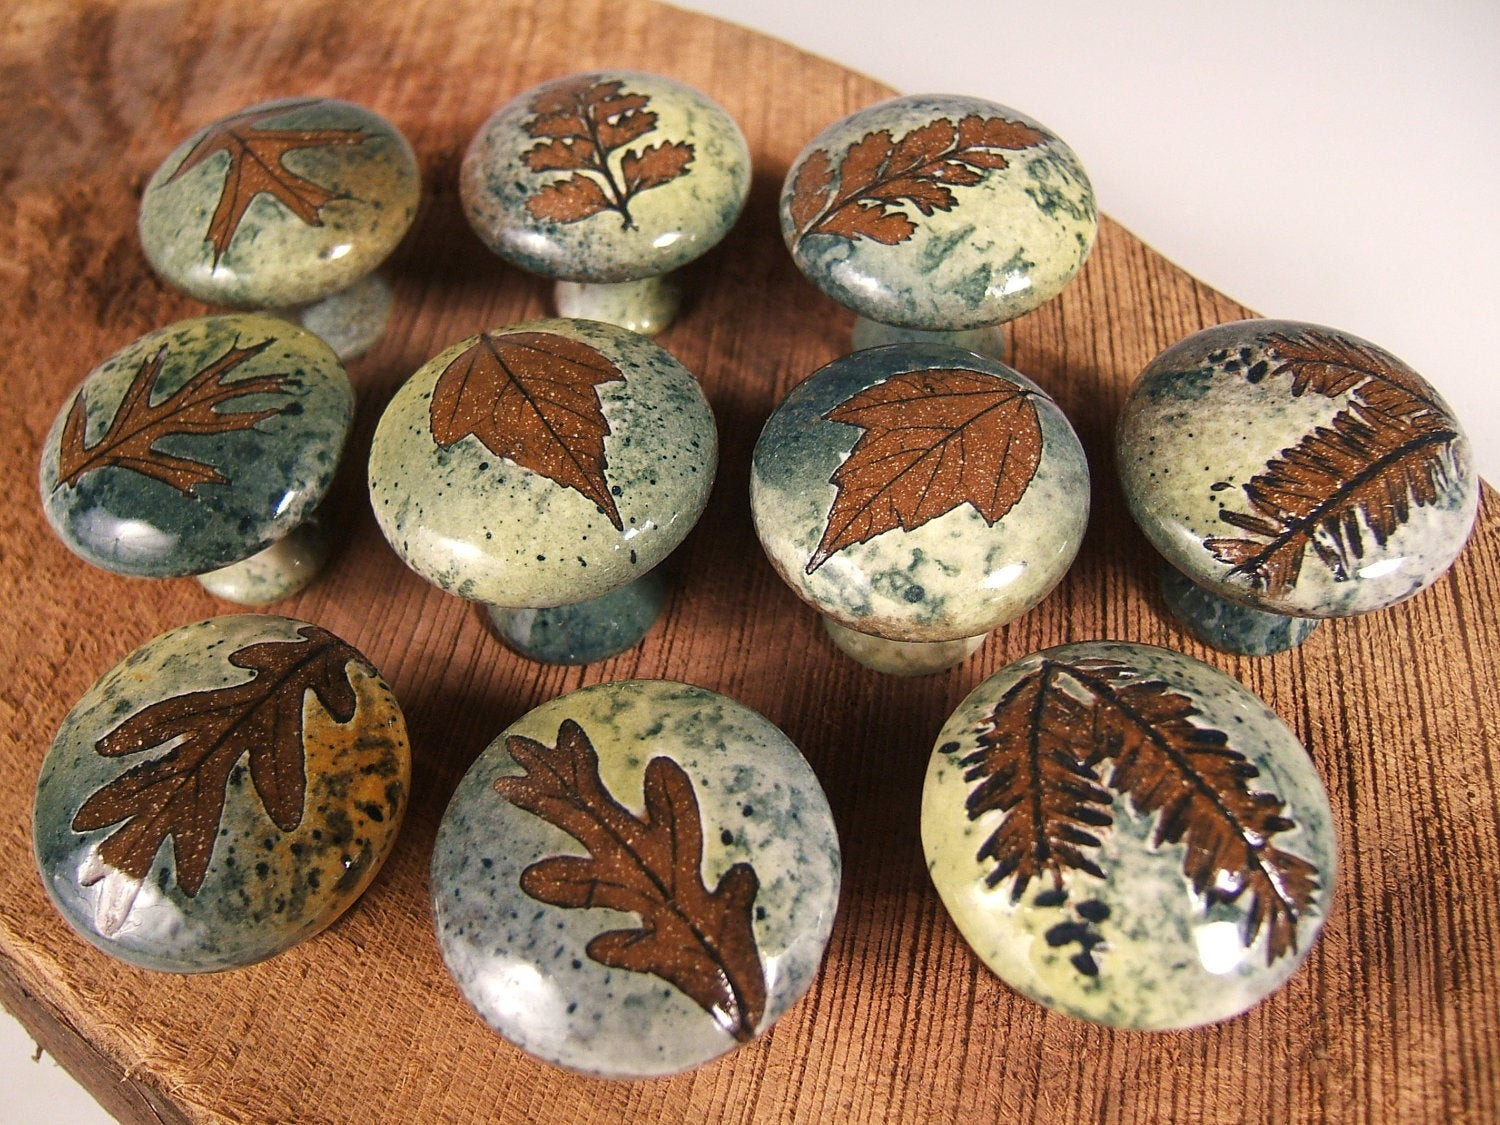 Rustic Kitchen Cabinet Knobs
 10 cabinet knobs drawer pulls Rustic Home Decor Nature